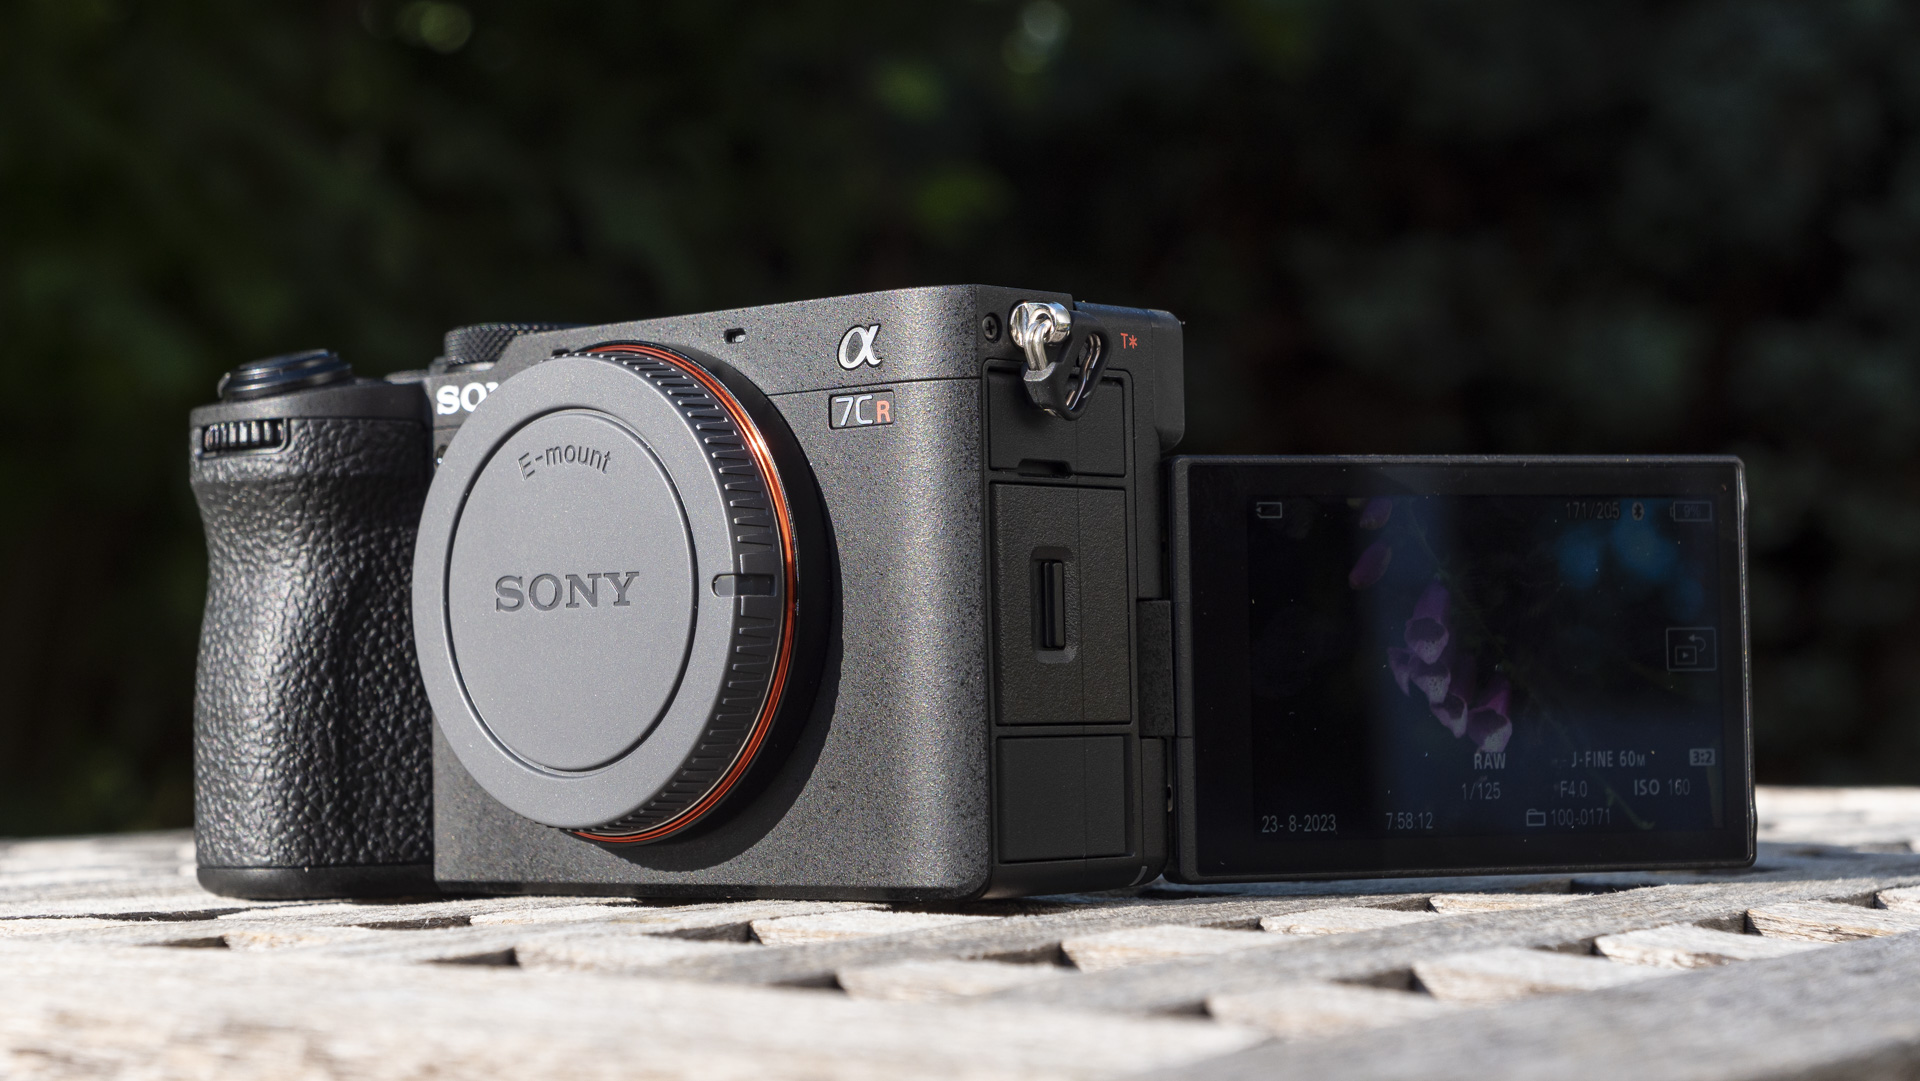 Sony A7C R mirrorless camera with touchscreen flipped out, outside on a wooden table